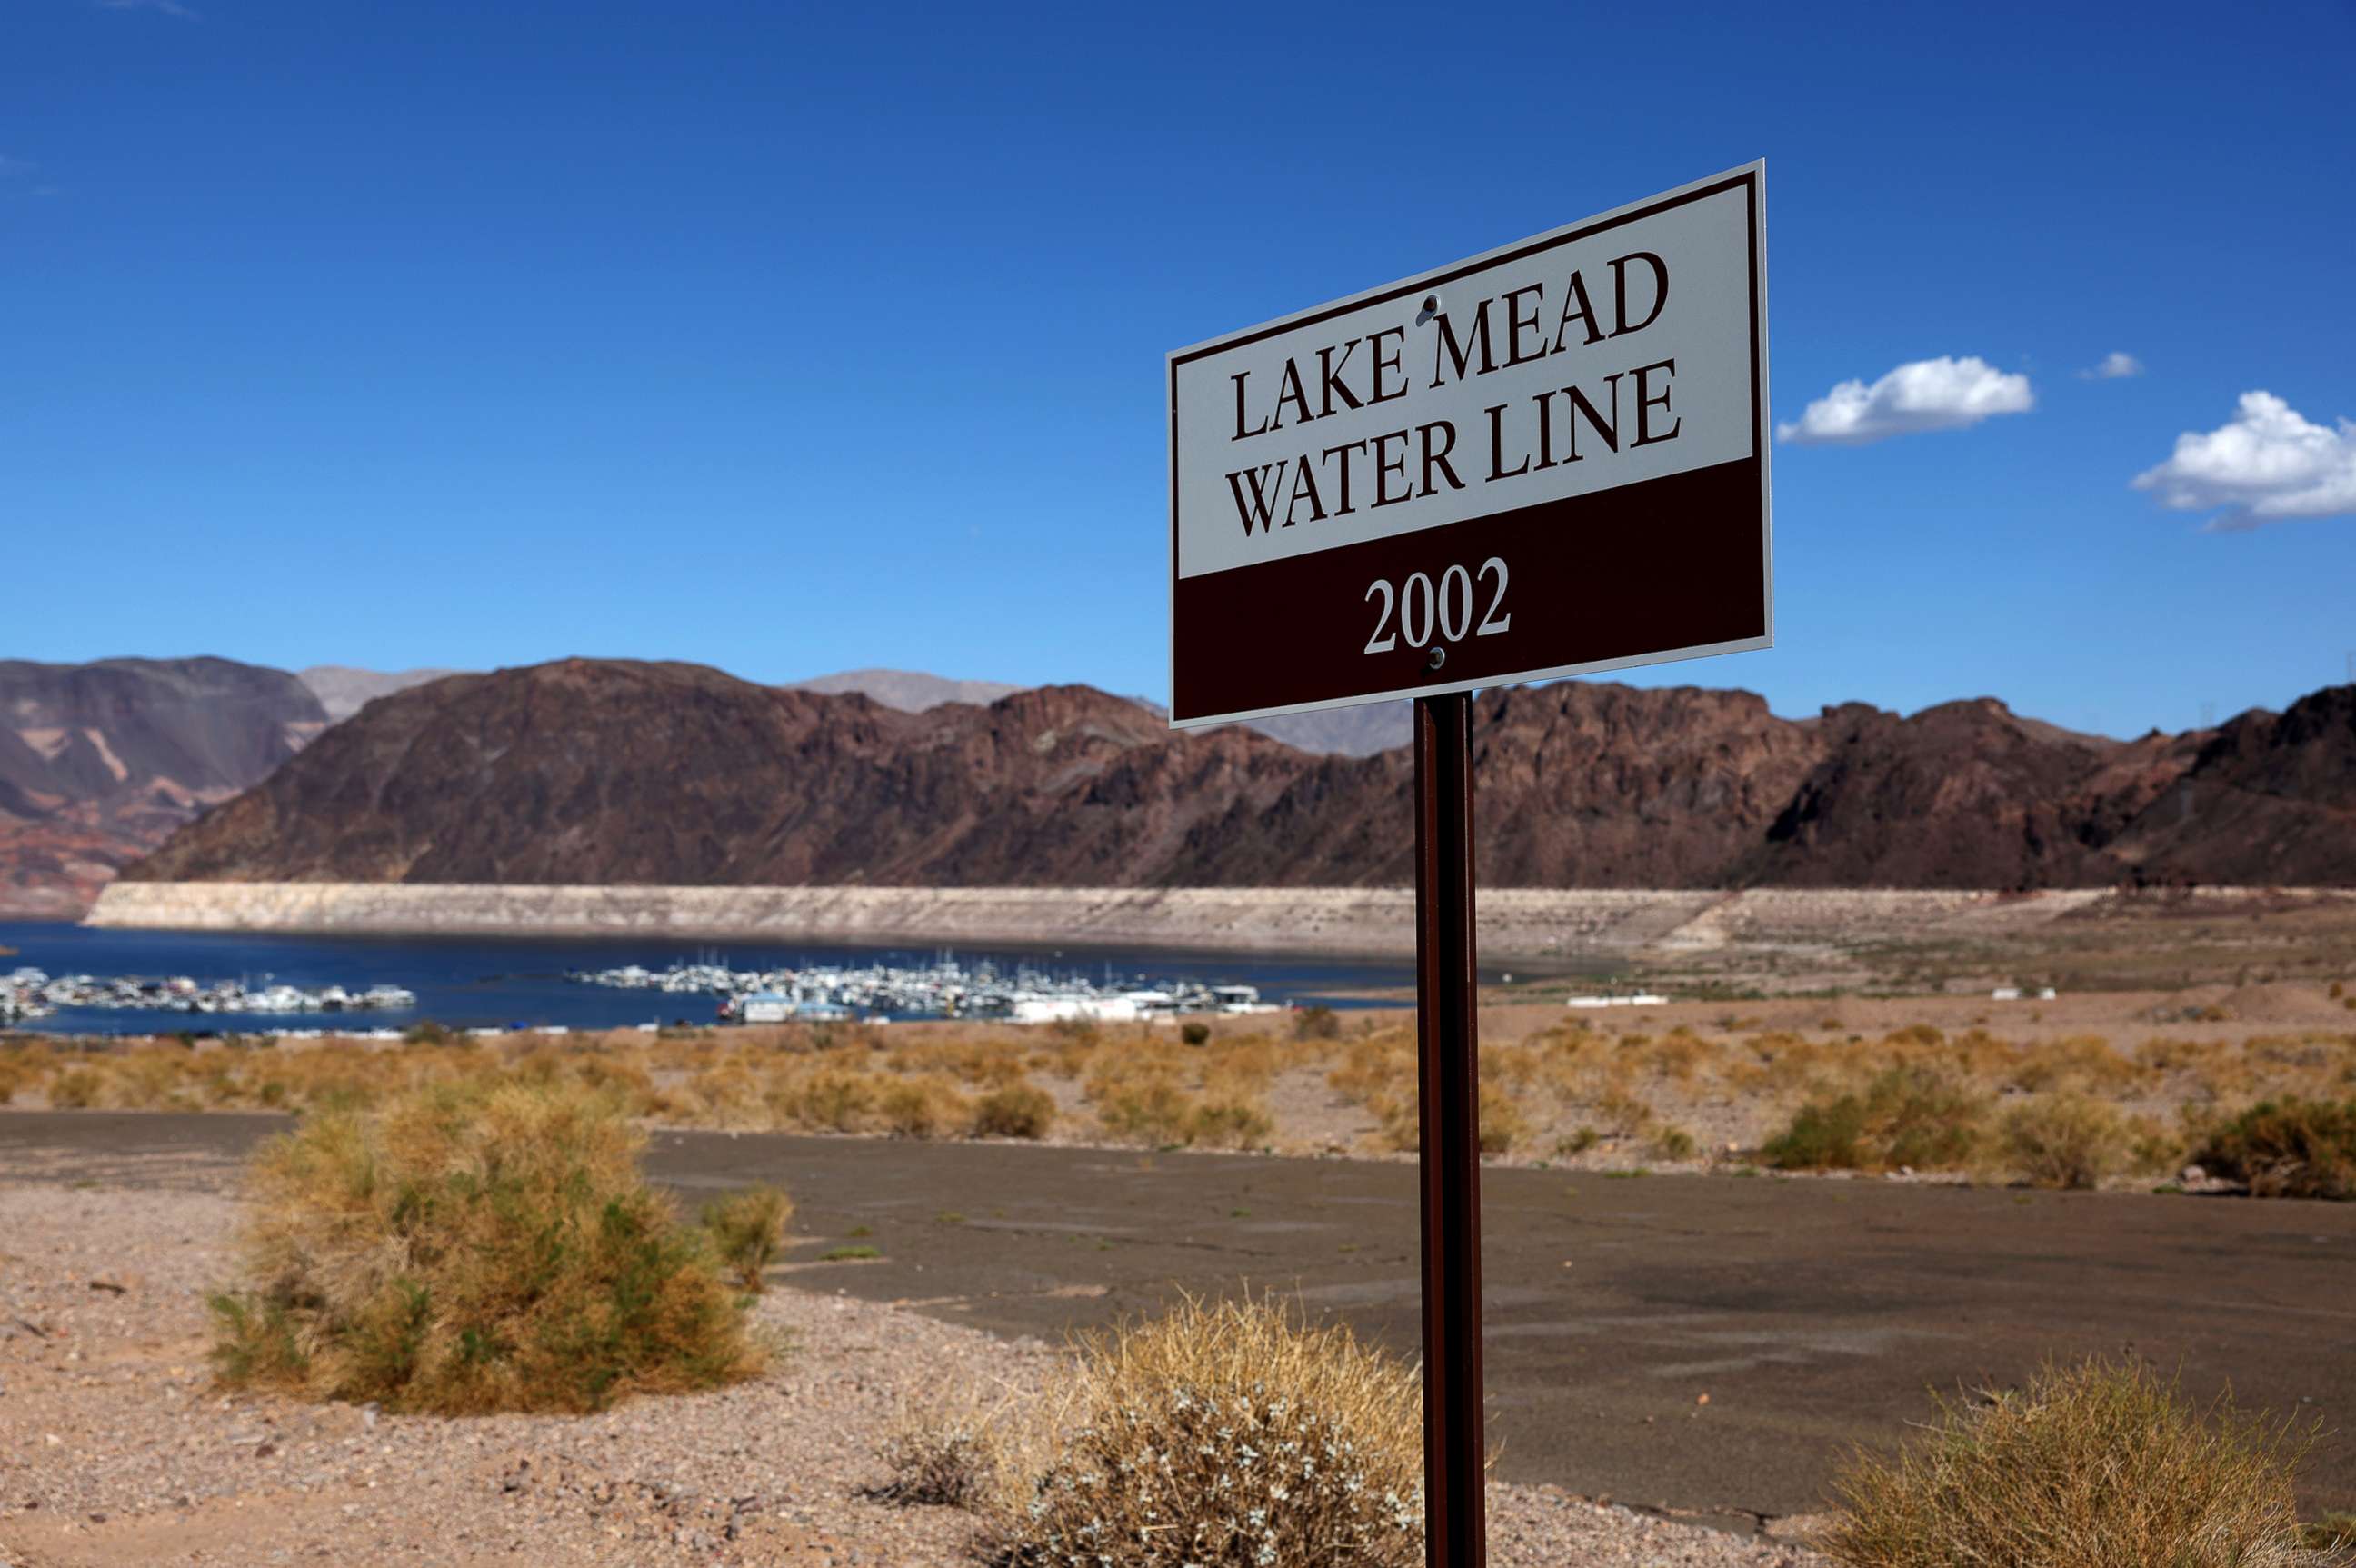 PHOTO: A sign showing where Lake Mead water levels were in 2002 is posted near the Lake Mead Marina, Aug. 19, 2022, in Lake Mead National Recreation Area, Nevada.